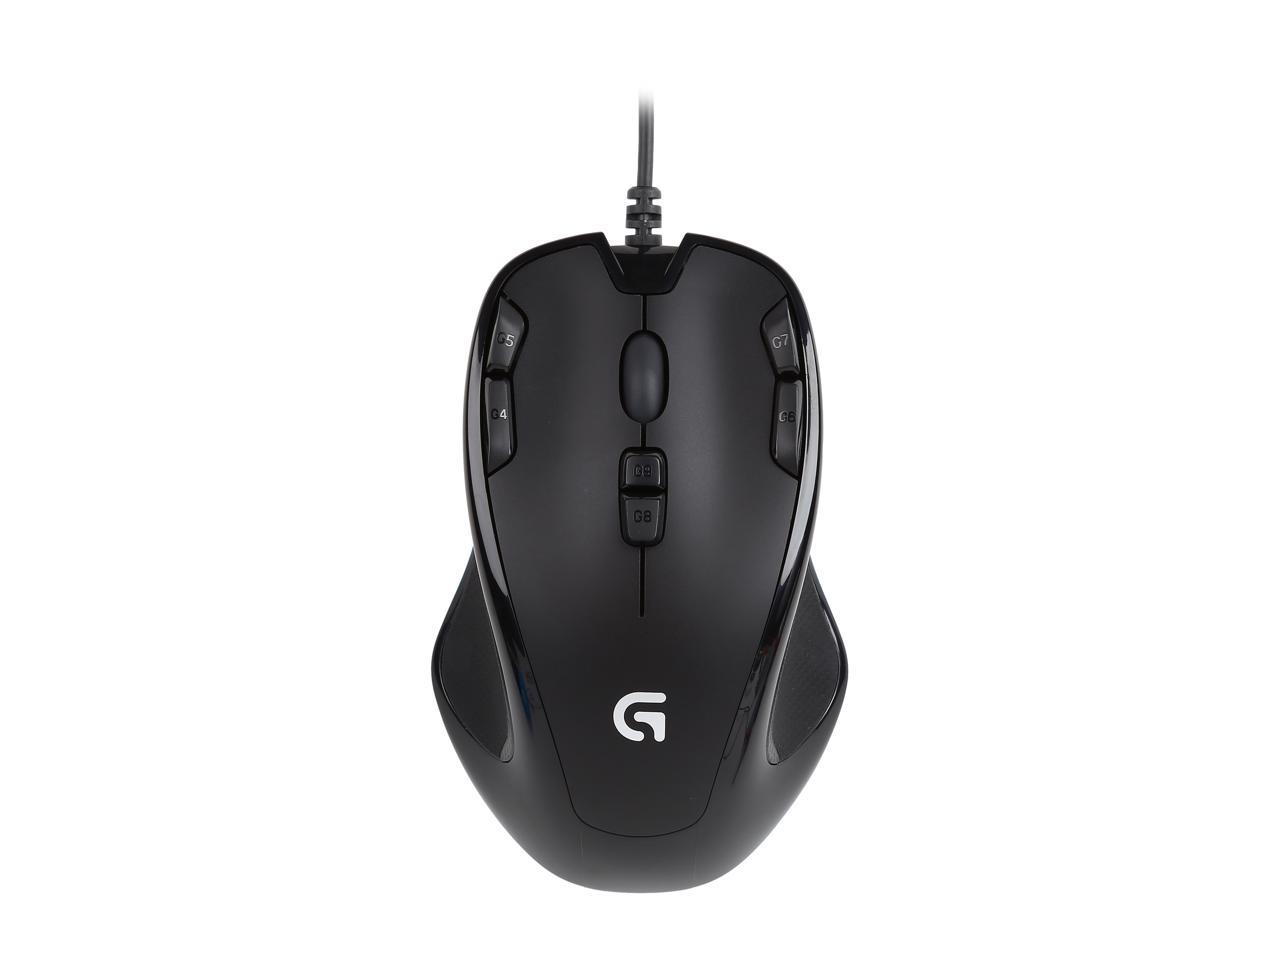 Logitech G300S 910-004360 9 Buttons 1 x Wheel USB Wired Optical 2500 dpi Gaming Mouse